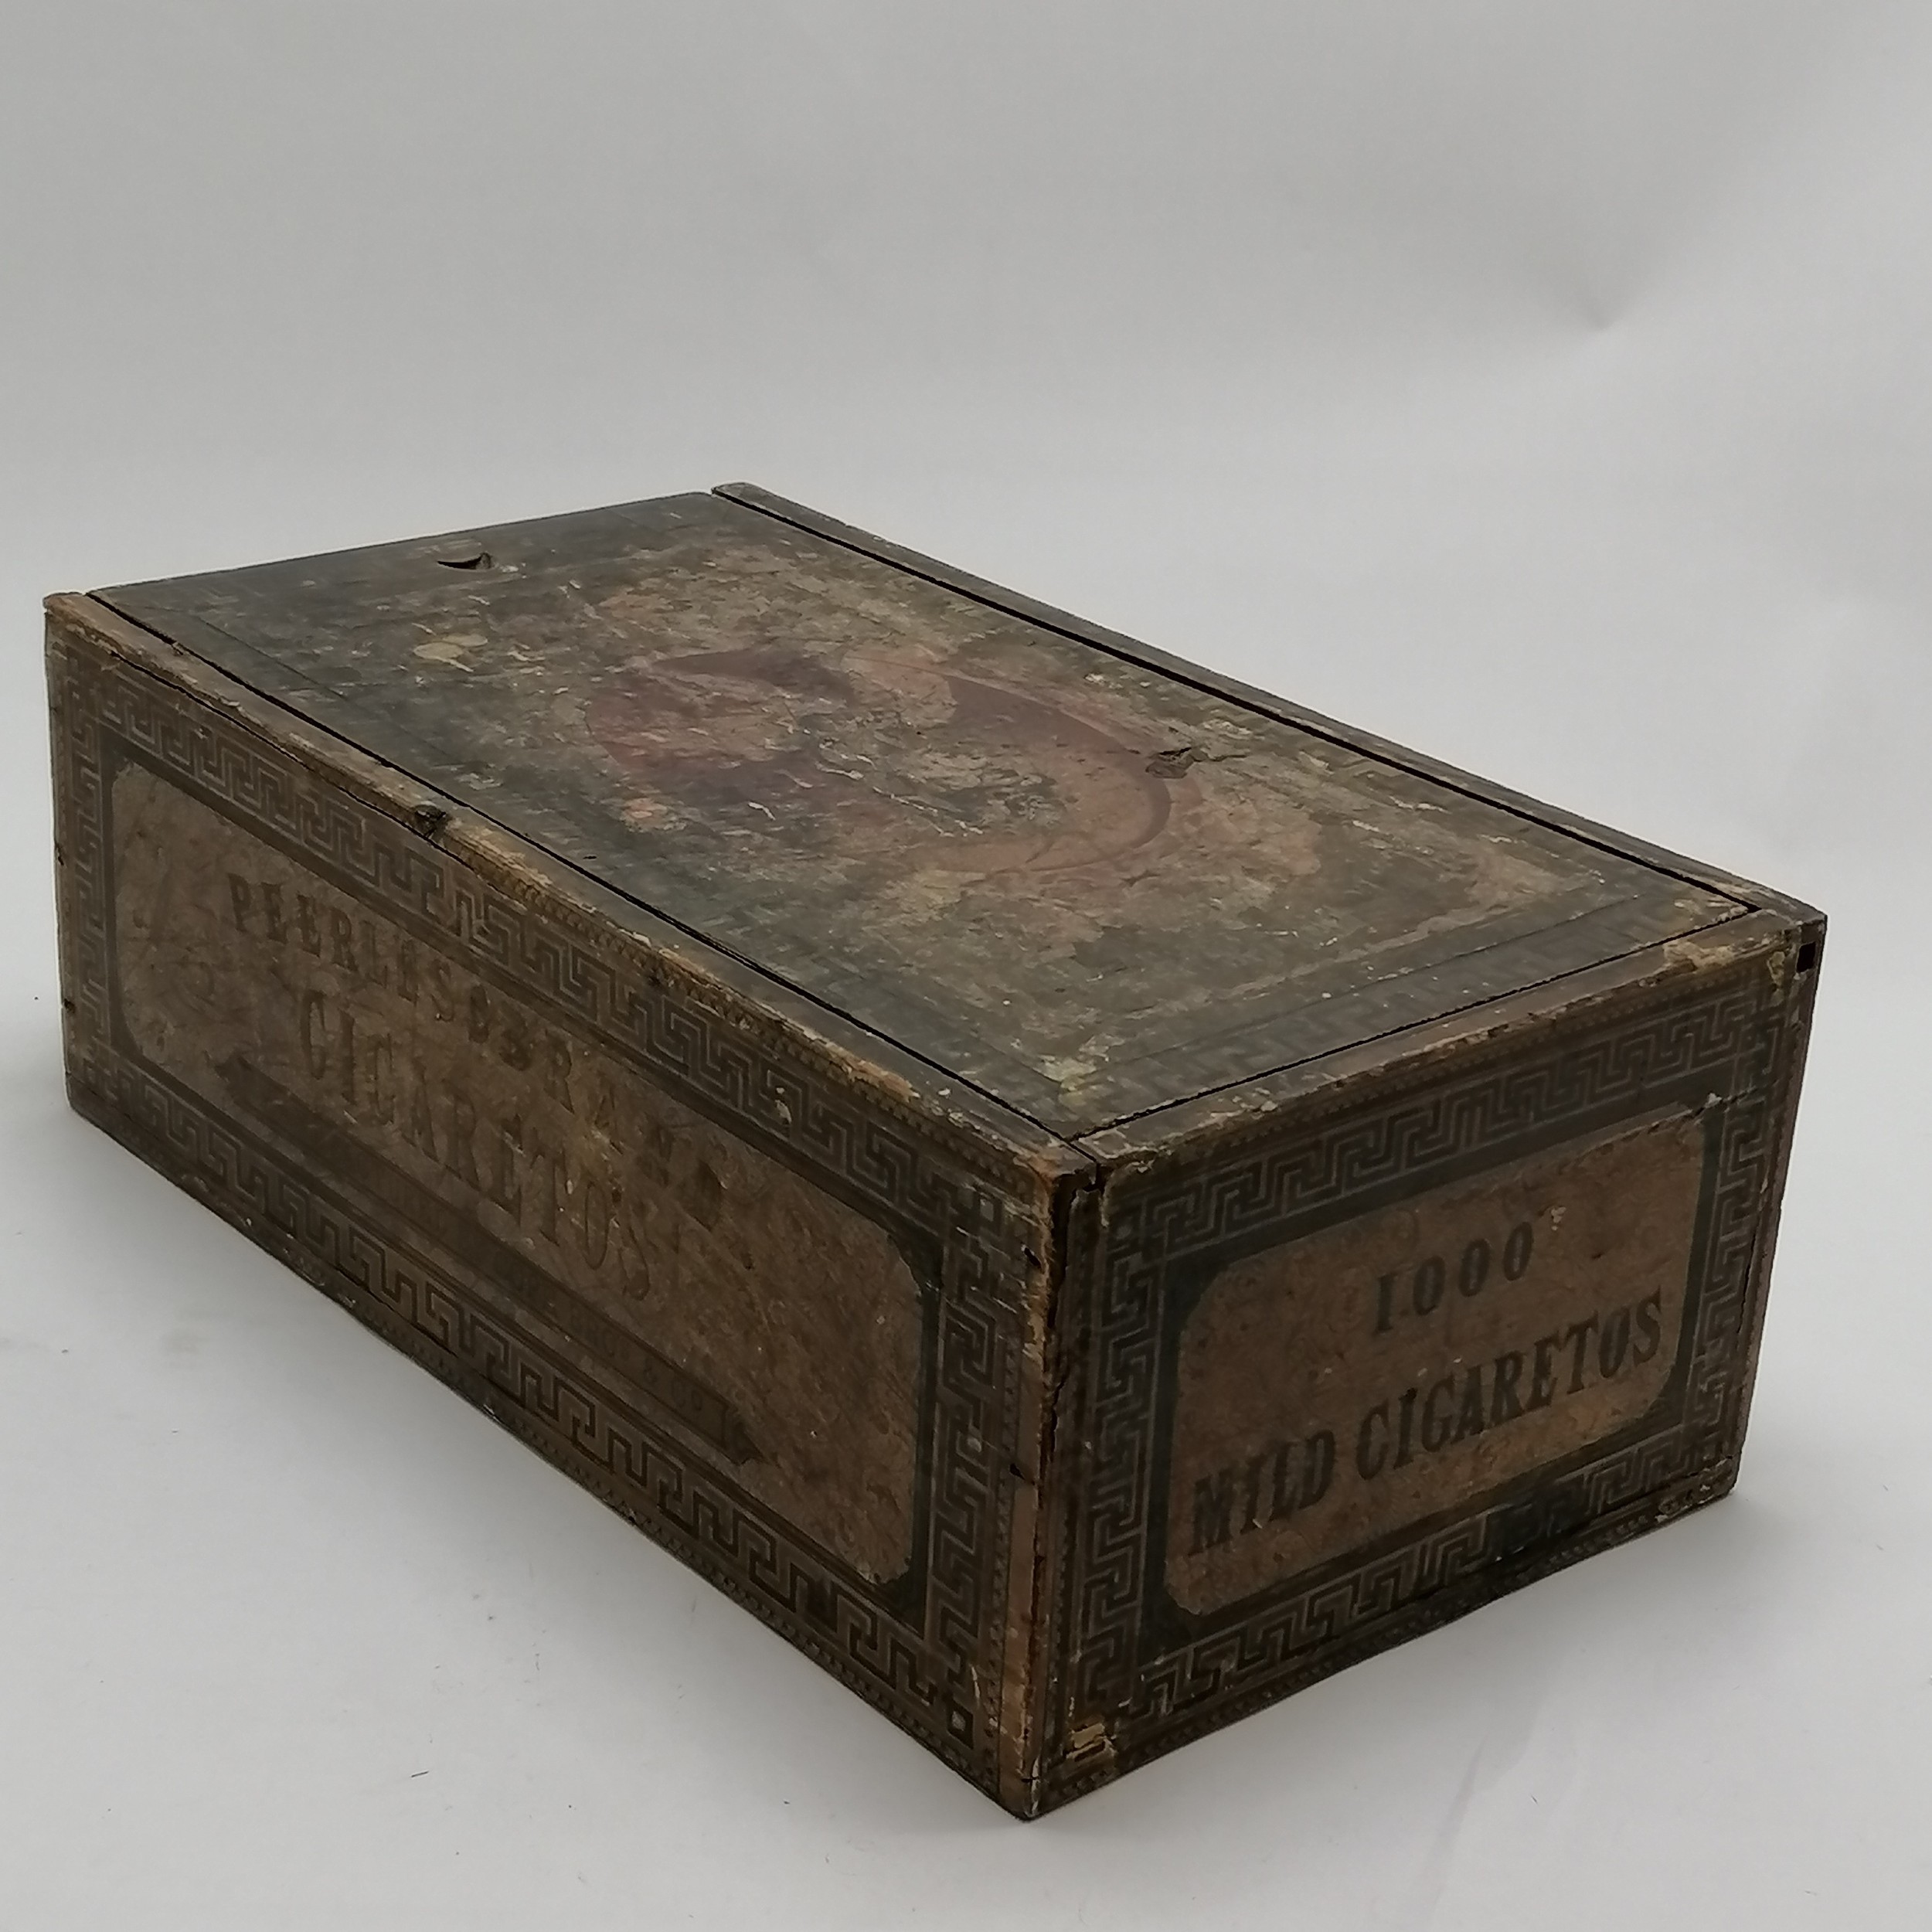 Antique Cope Bros 1000 cigarettes wooden advertising box with sliding lid & greek key detail - - Image 3 of 6